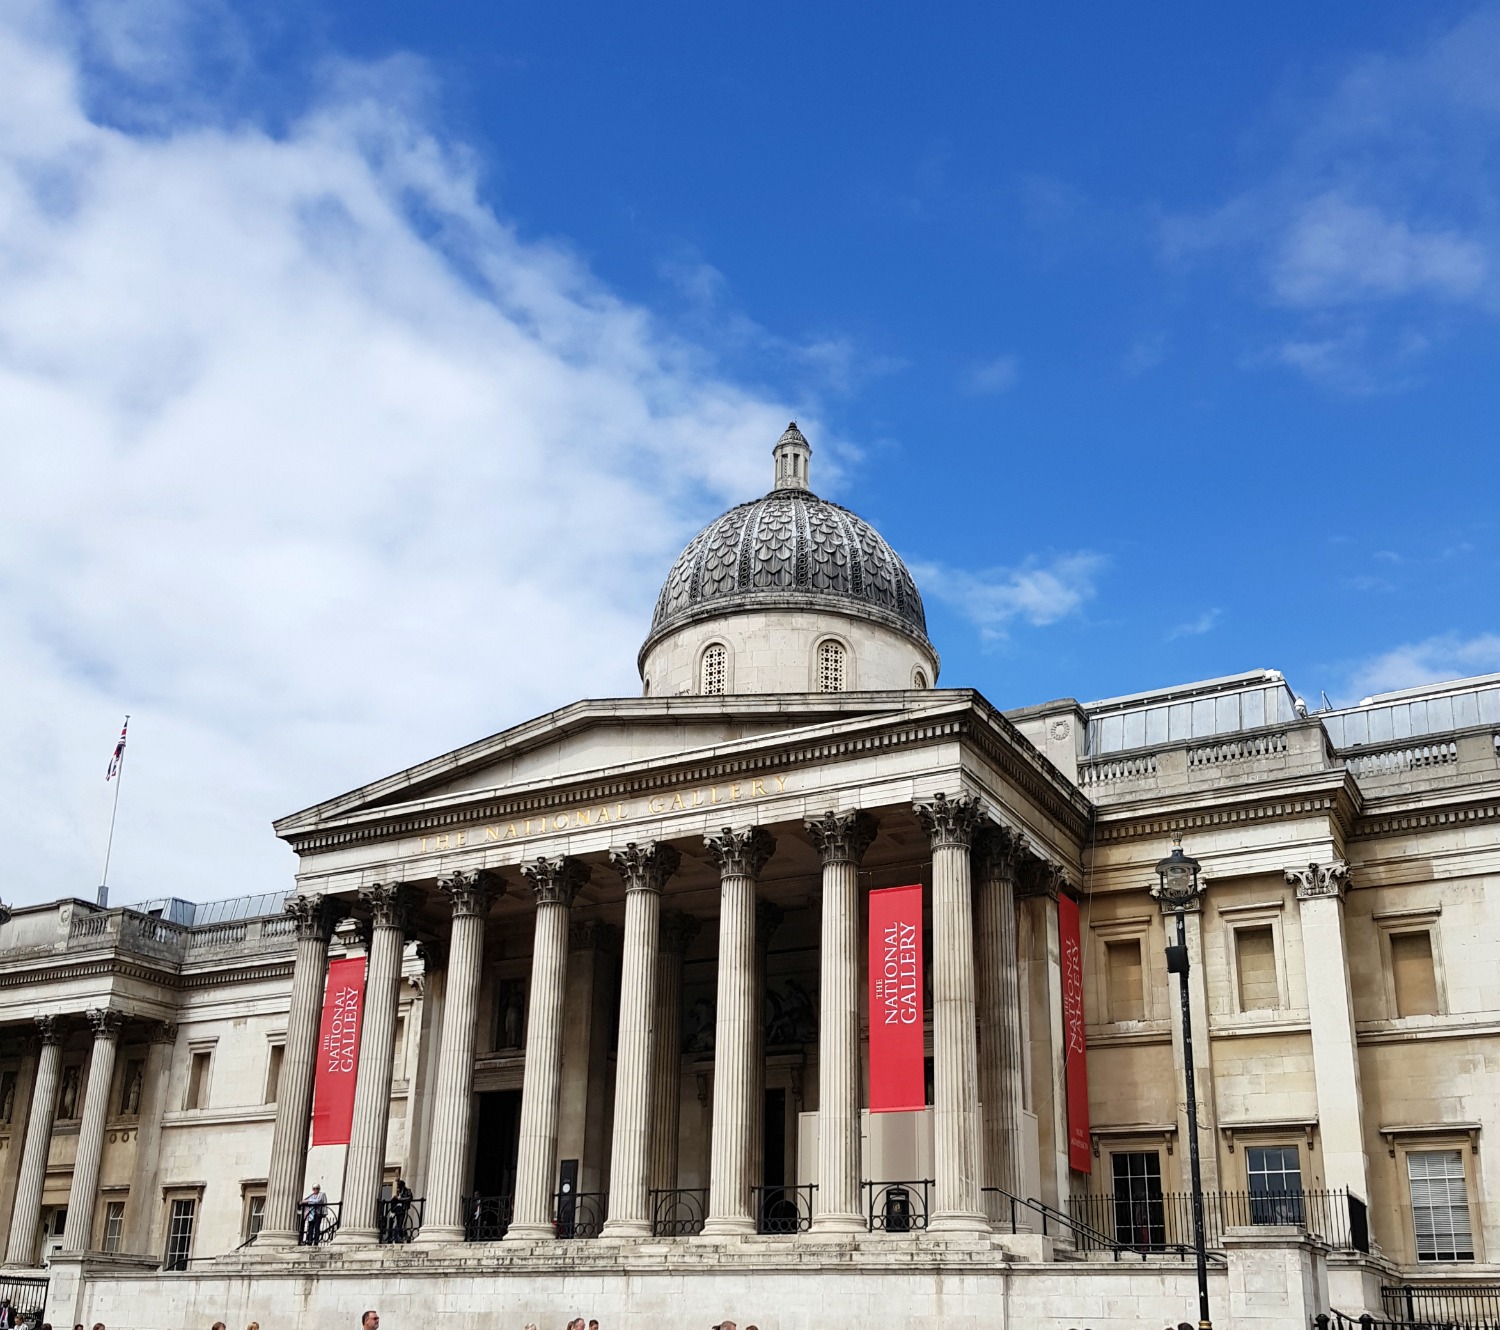 The exterior of the National Gallery in London, seen from Trafalgar Square against a blue sky - one of the London attractions with air conditioning